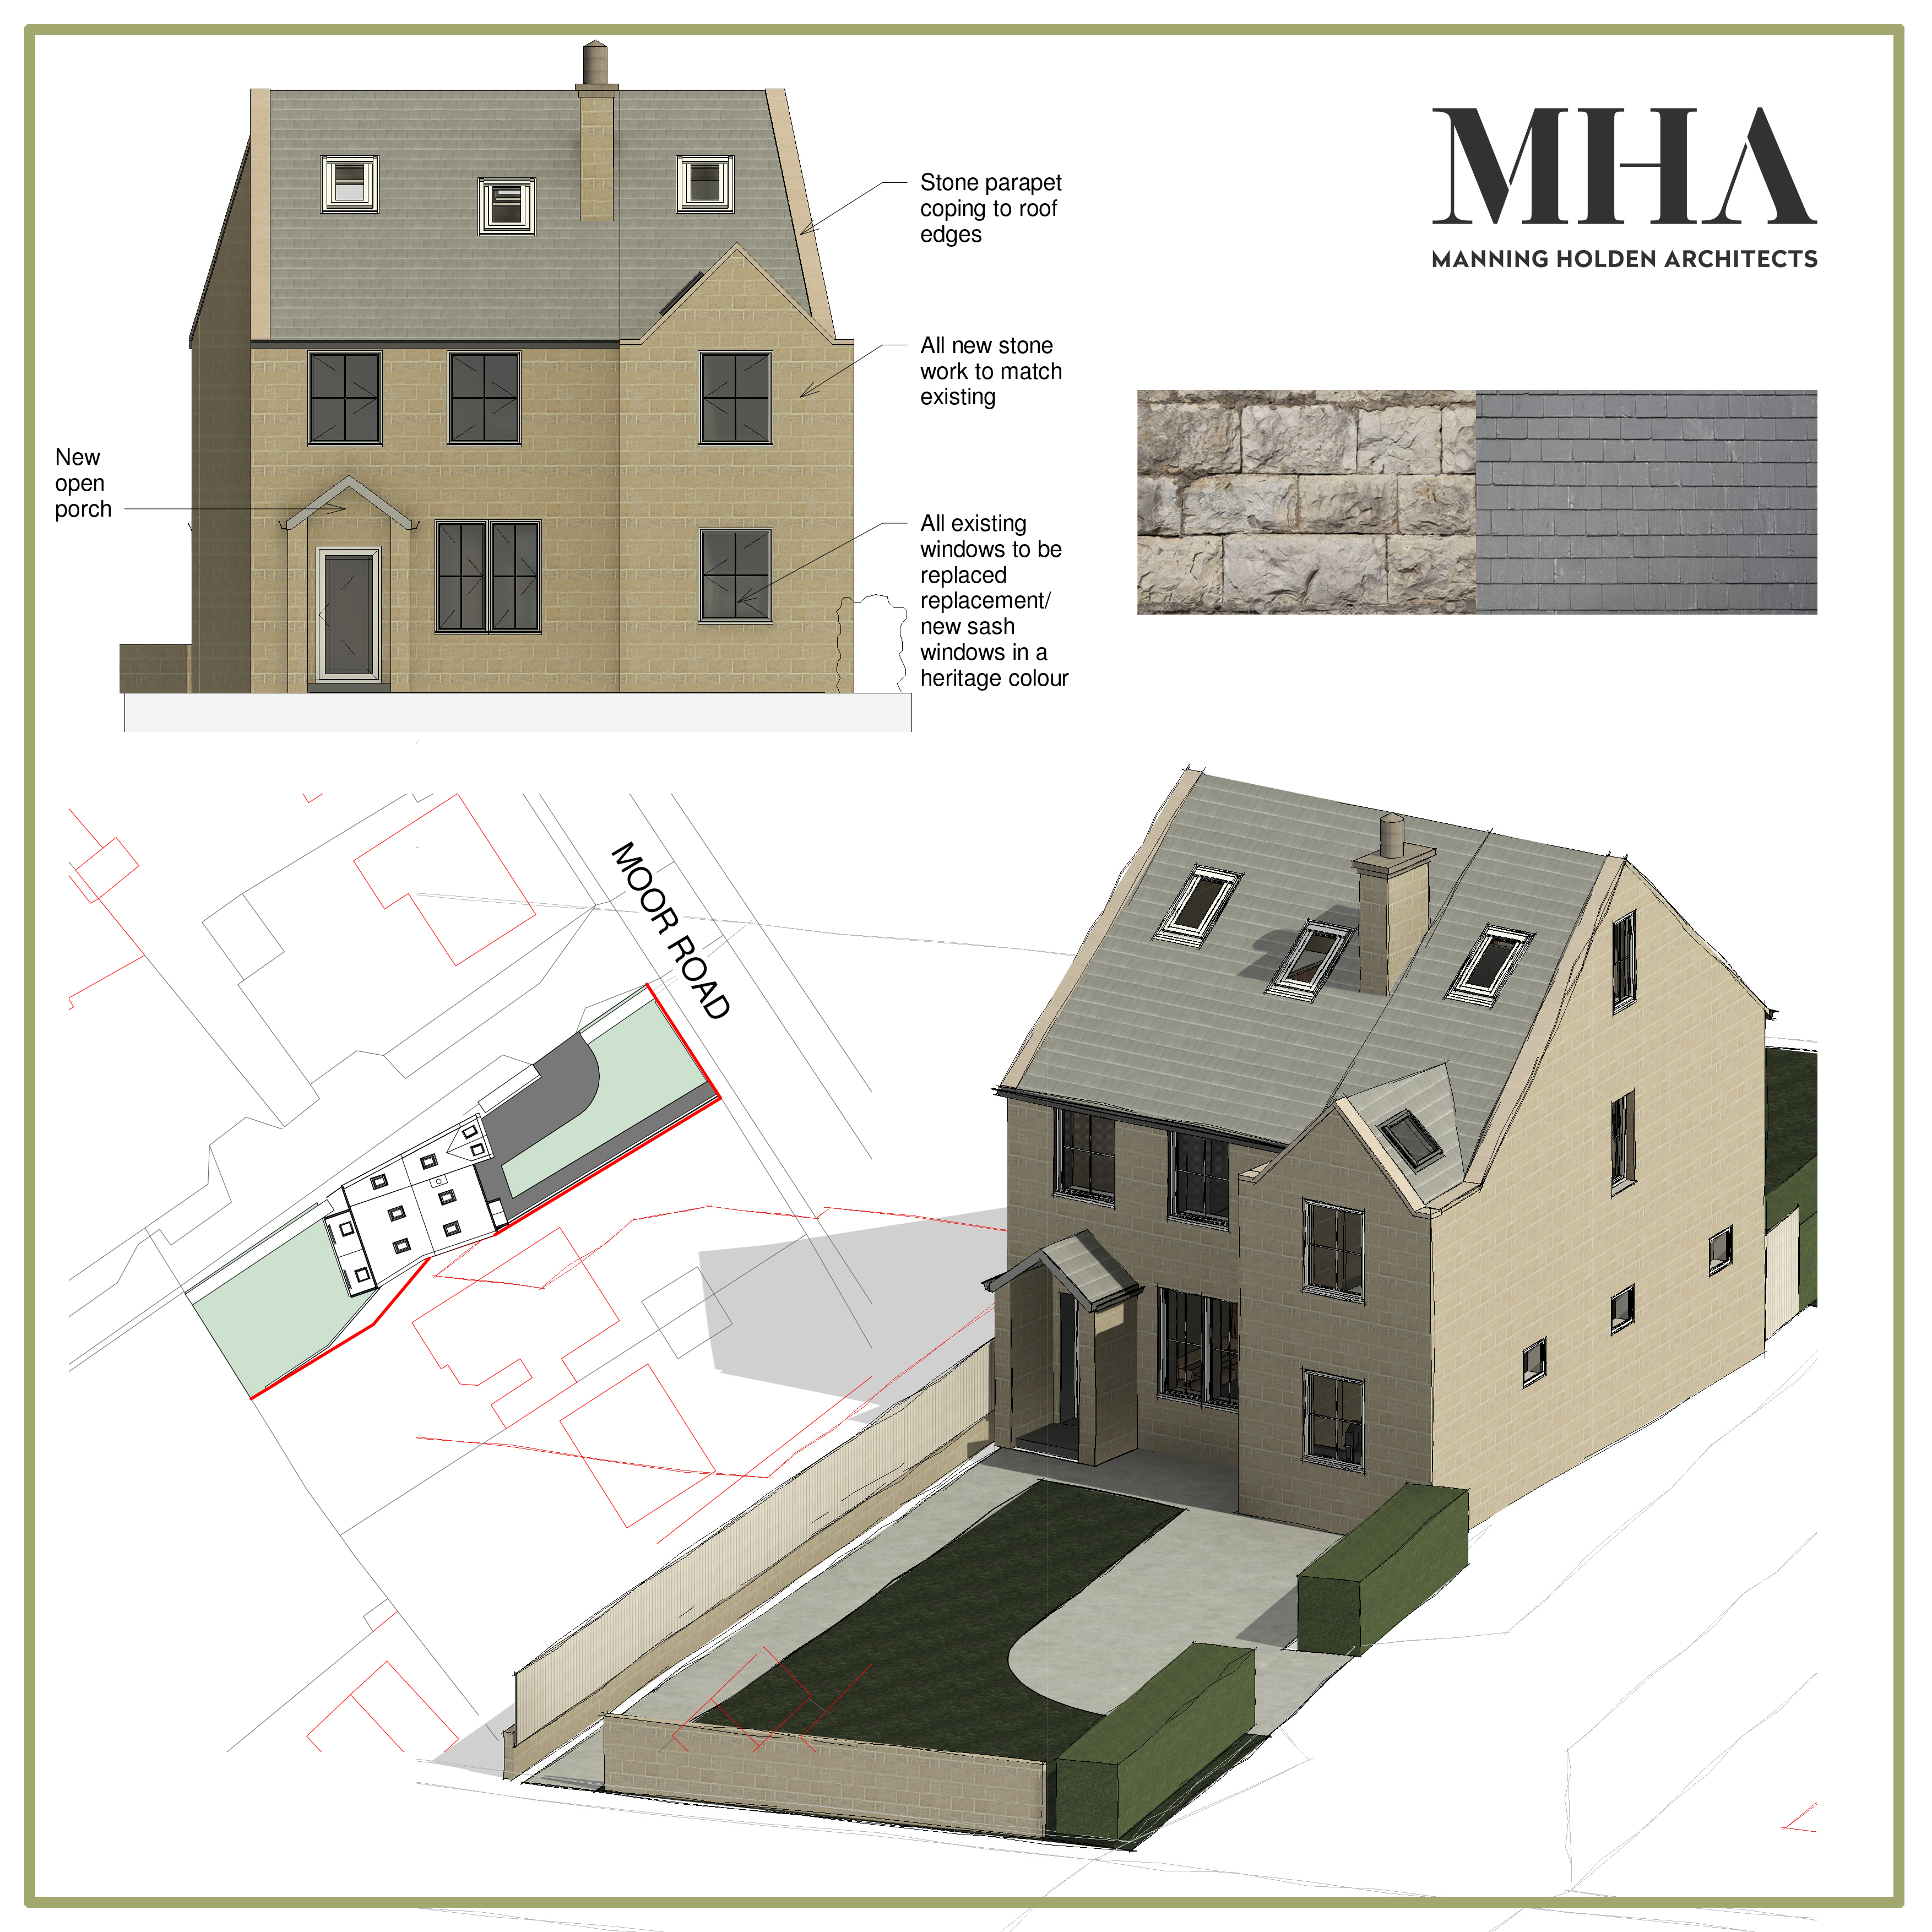 Planning granted for 2 storey stone extension to North East Derbyshire (Ashover) home